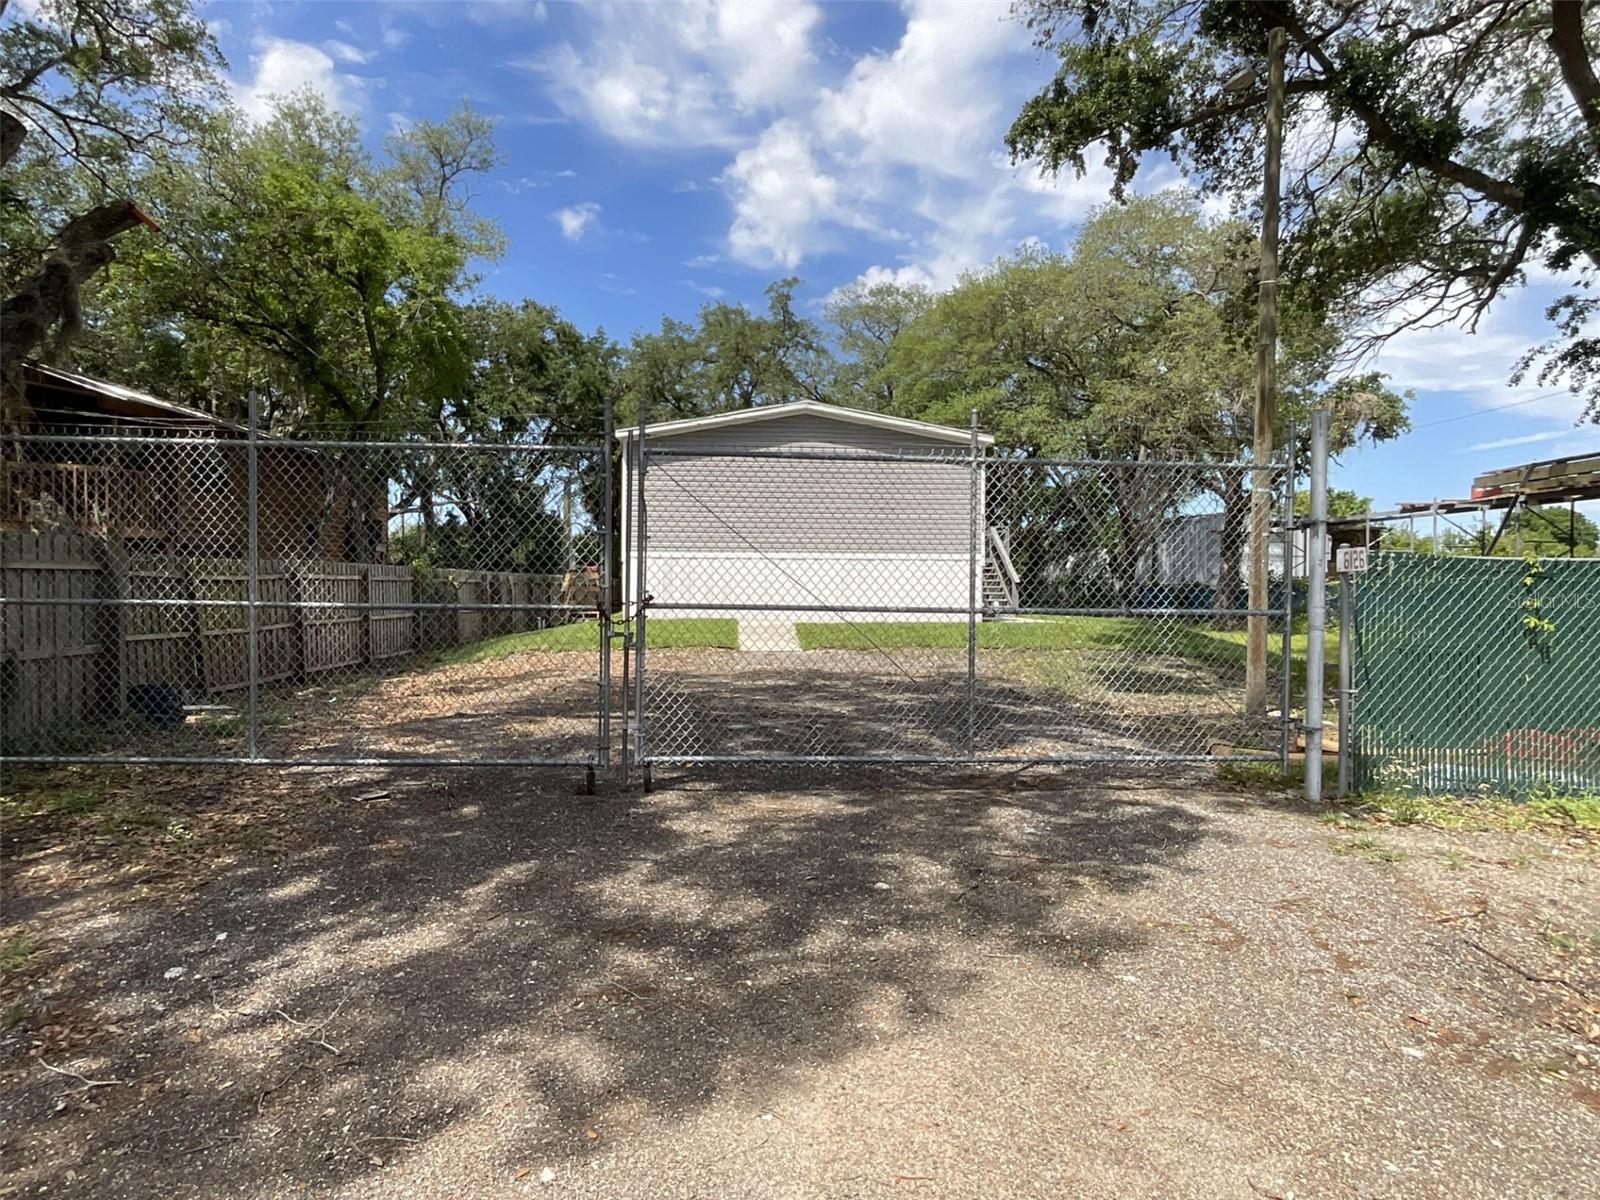 Extra wide double gate to get your hobbies and toys into the large backyard